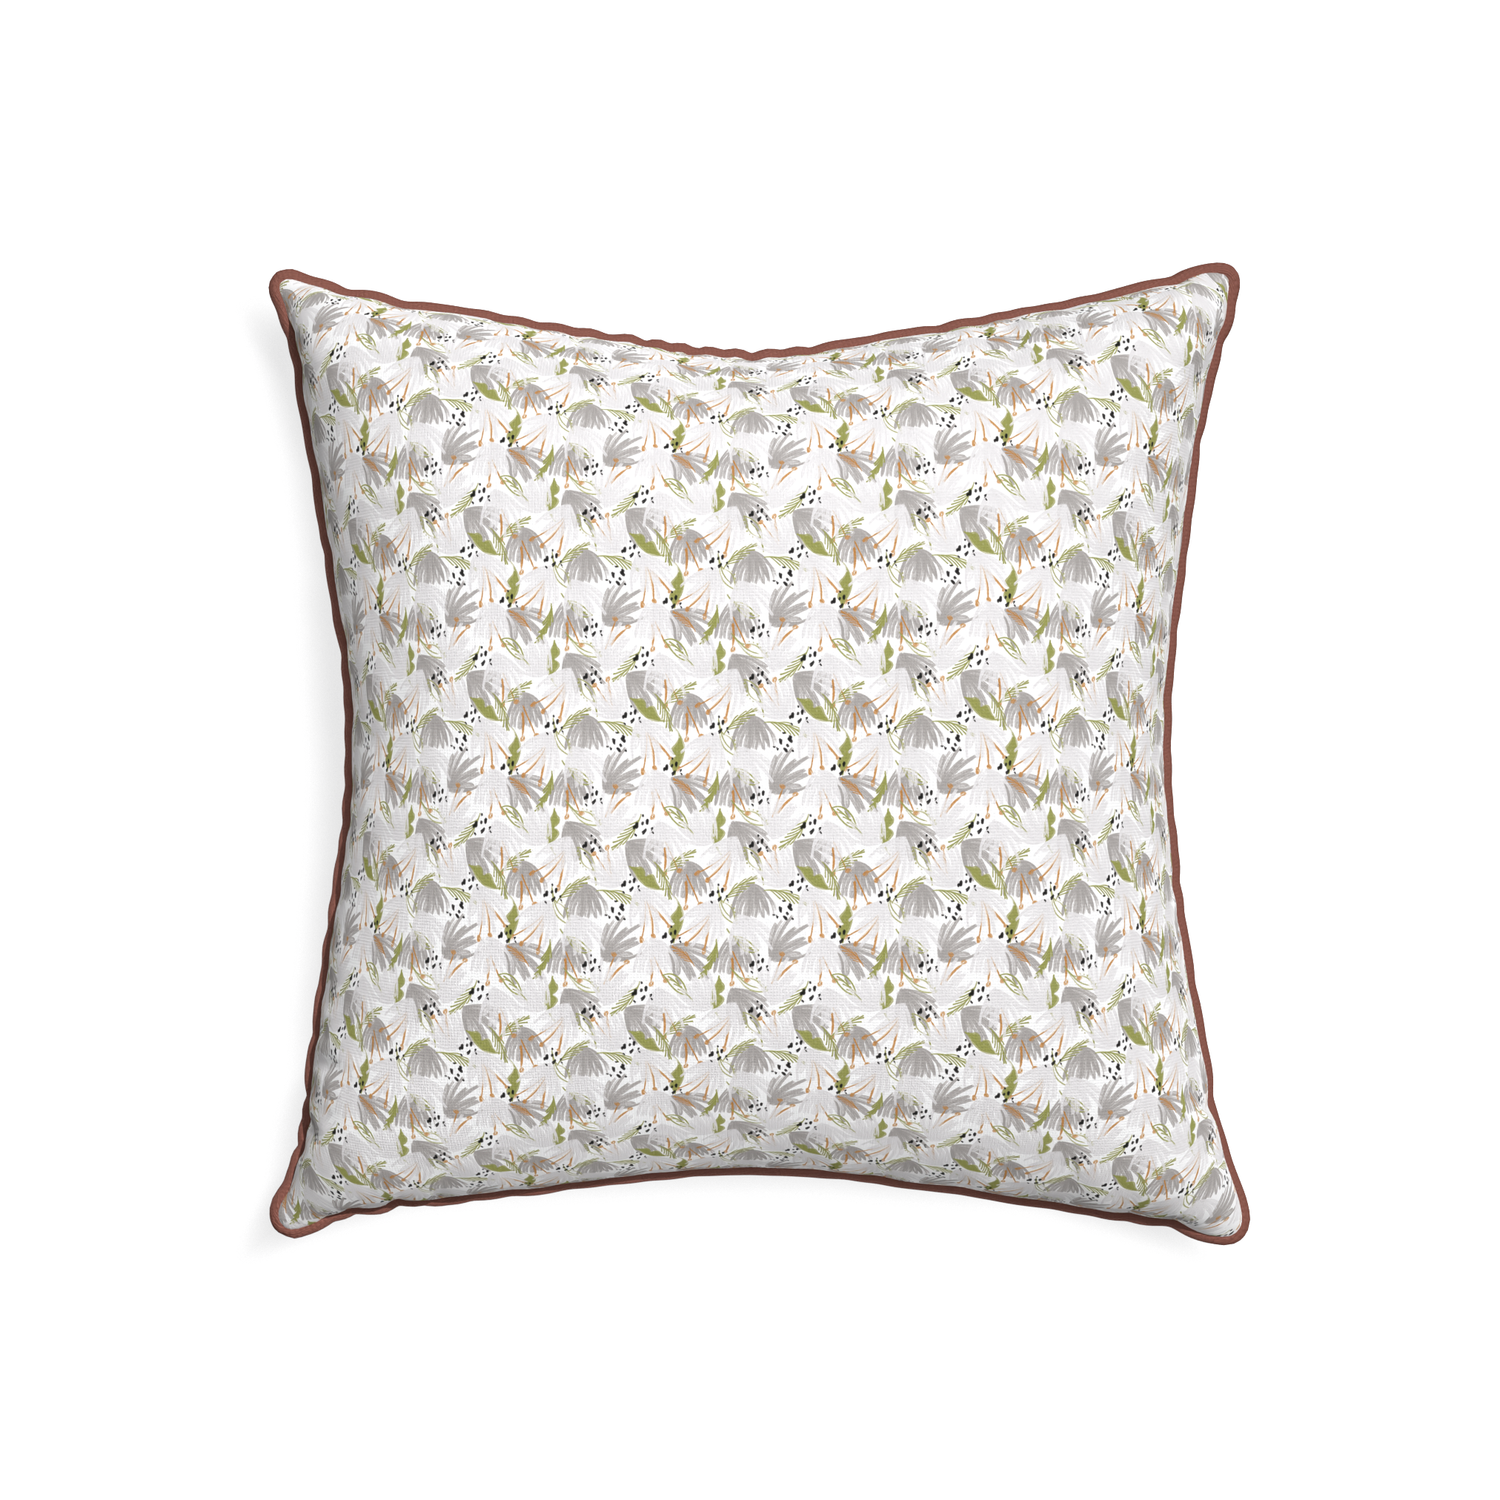 22-square eden grey custom pillow with w piping on white background